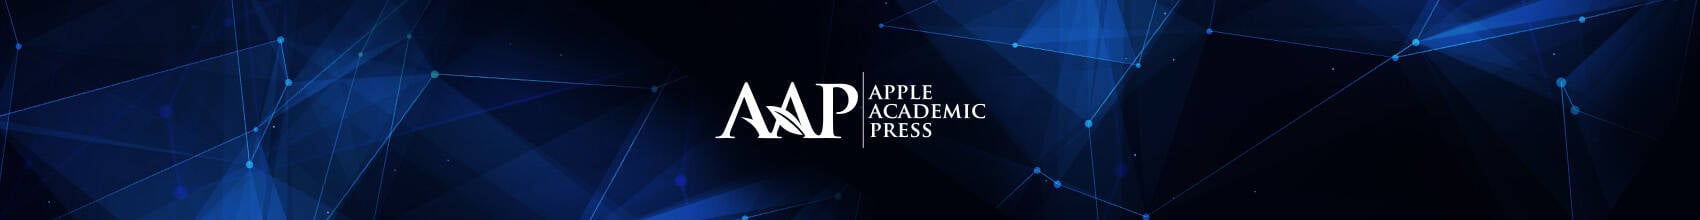 Apple Academic Press is an independent international publisher focusing on academic and professional research books